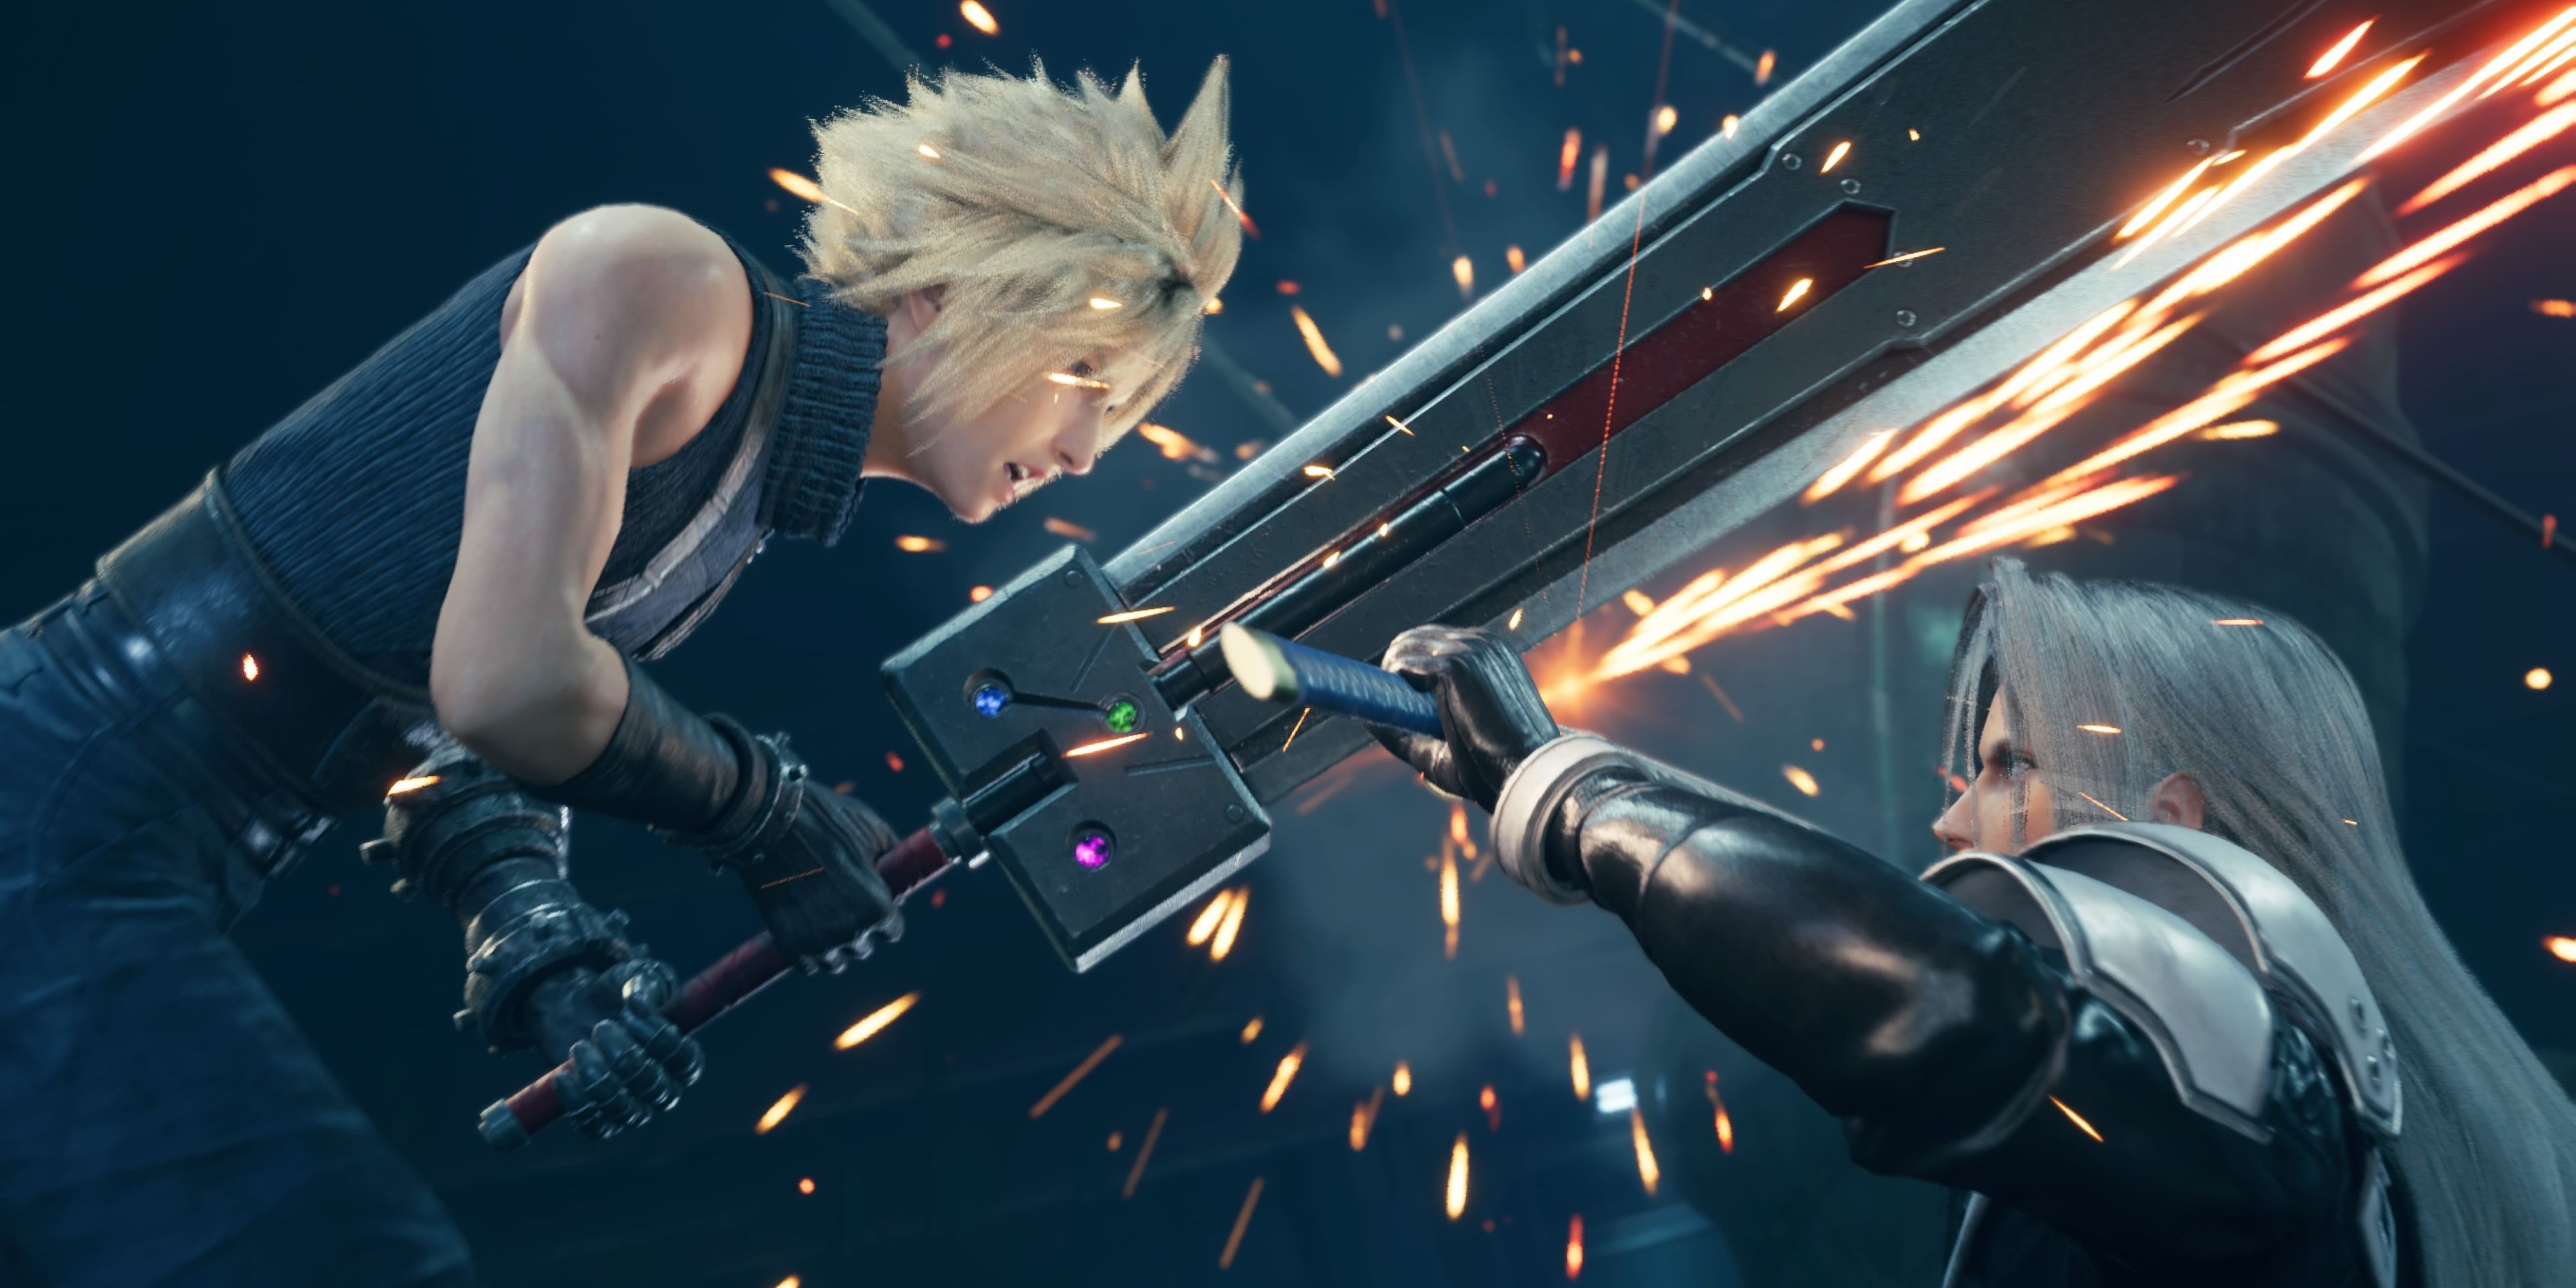 Cloud and Sephiroth from Final Fantasy VII 7 Remake Rebirth fight with swords.